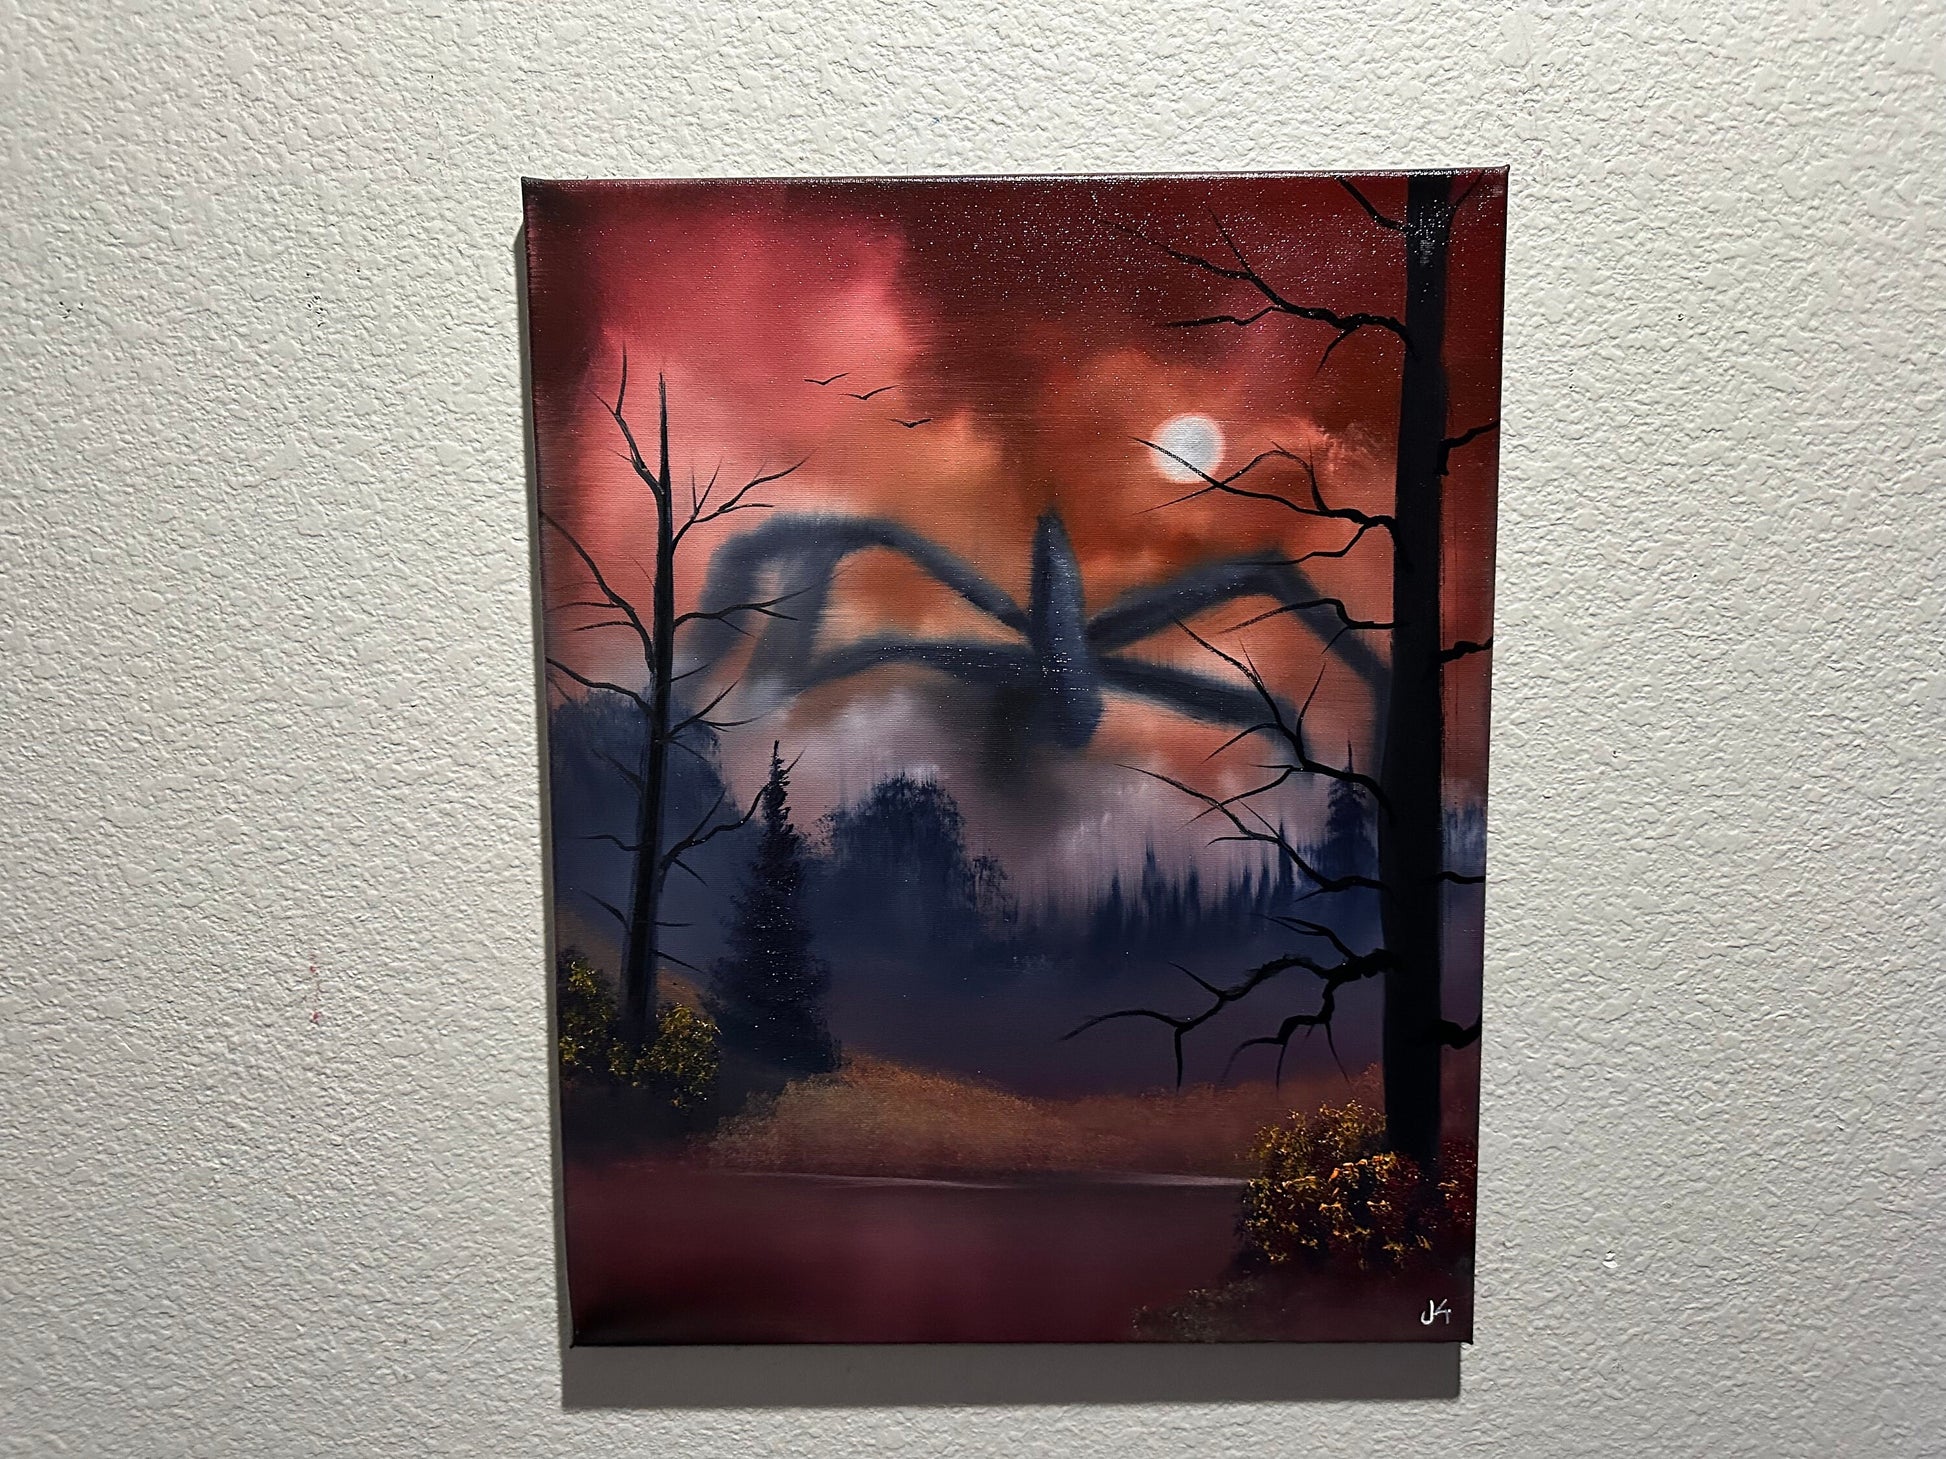 Painting 975 - 16x20" Canvas - Stranger Things inspired Oil Landscape painted Live on TikTok on 10/6/23 by PaintWithJosh